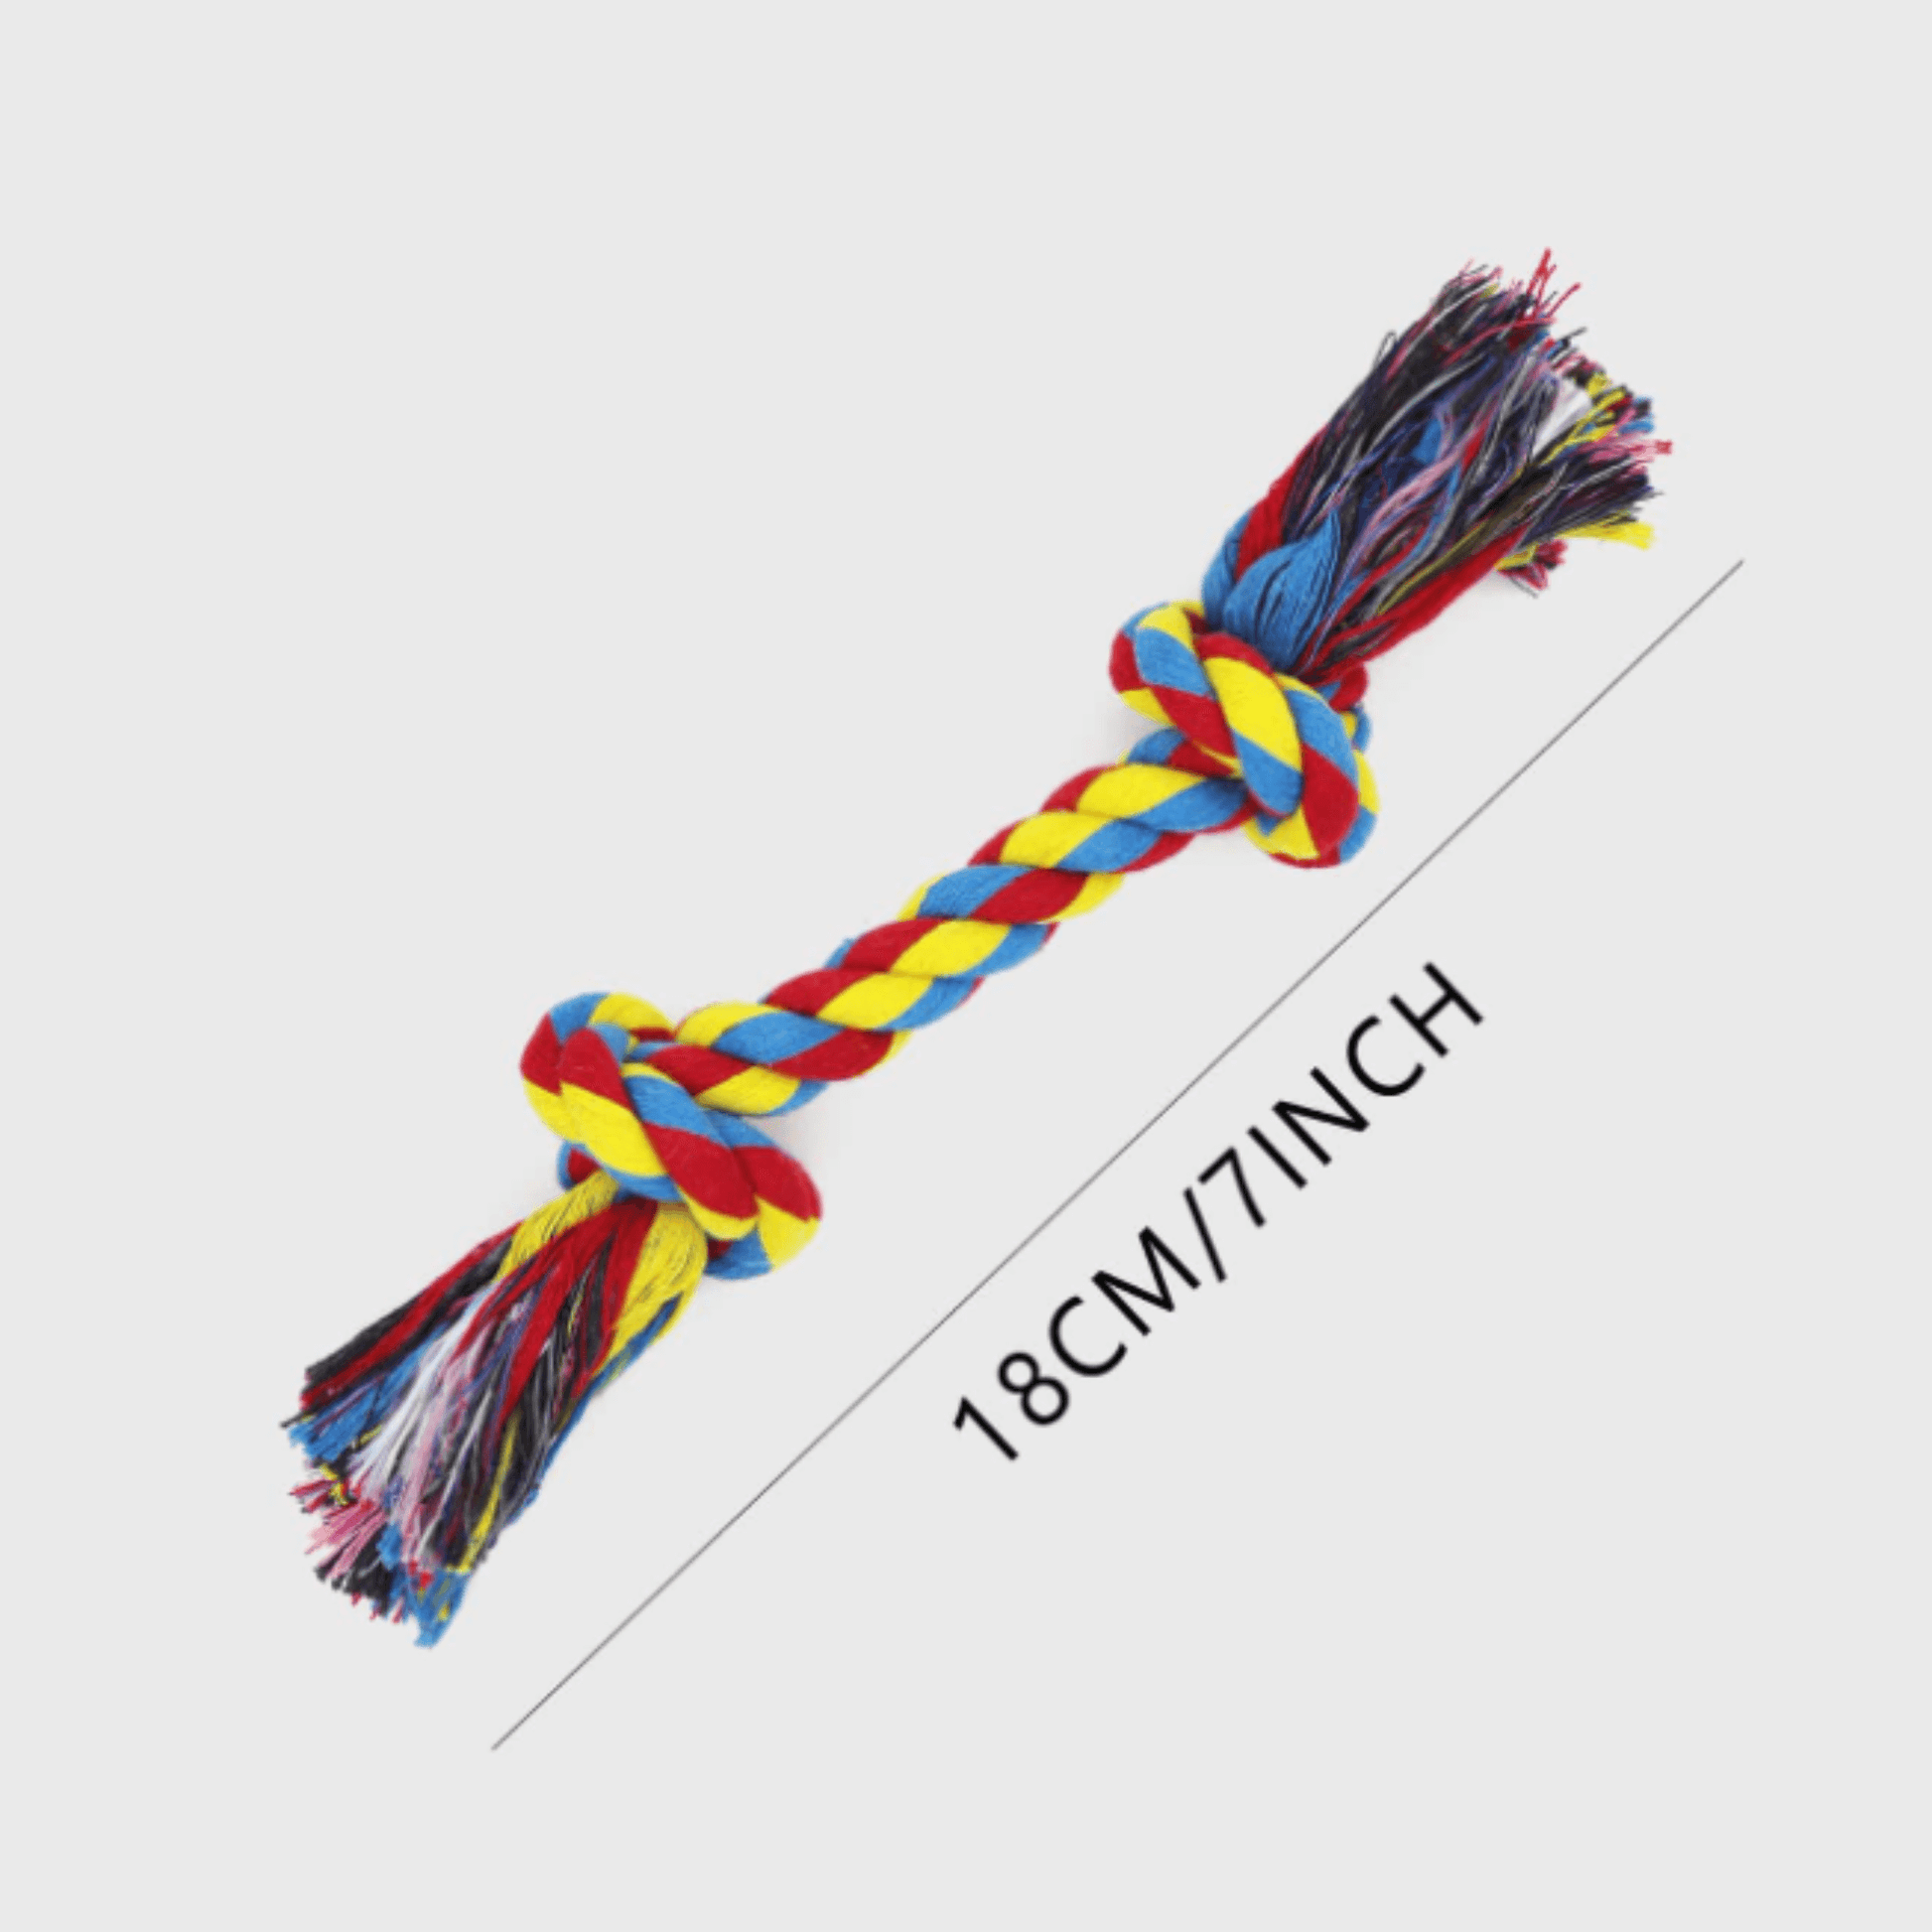 A multicolored braided rope dog toy with a knotted design. The toy is made of natural materials and is lightweight and easy for dogs to carry around. It is perfect for aggressive chewers and promotes healthy chewing behavior.